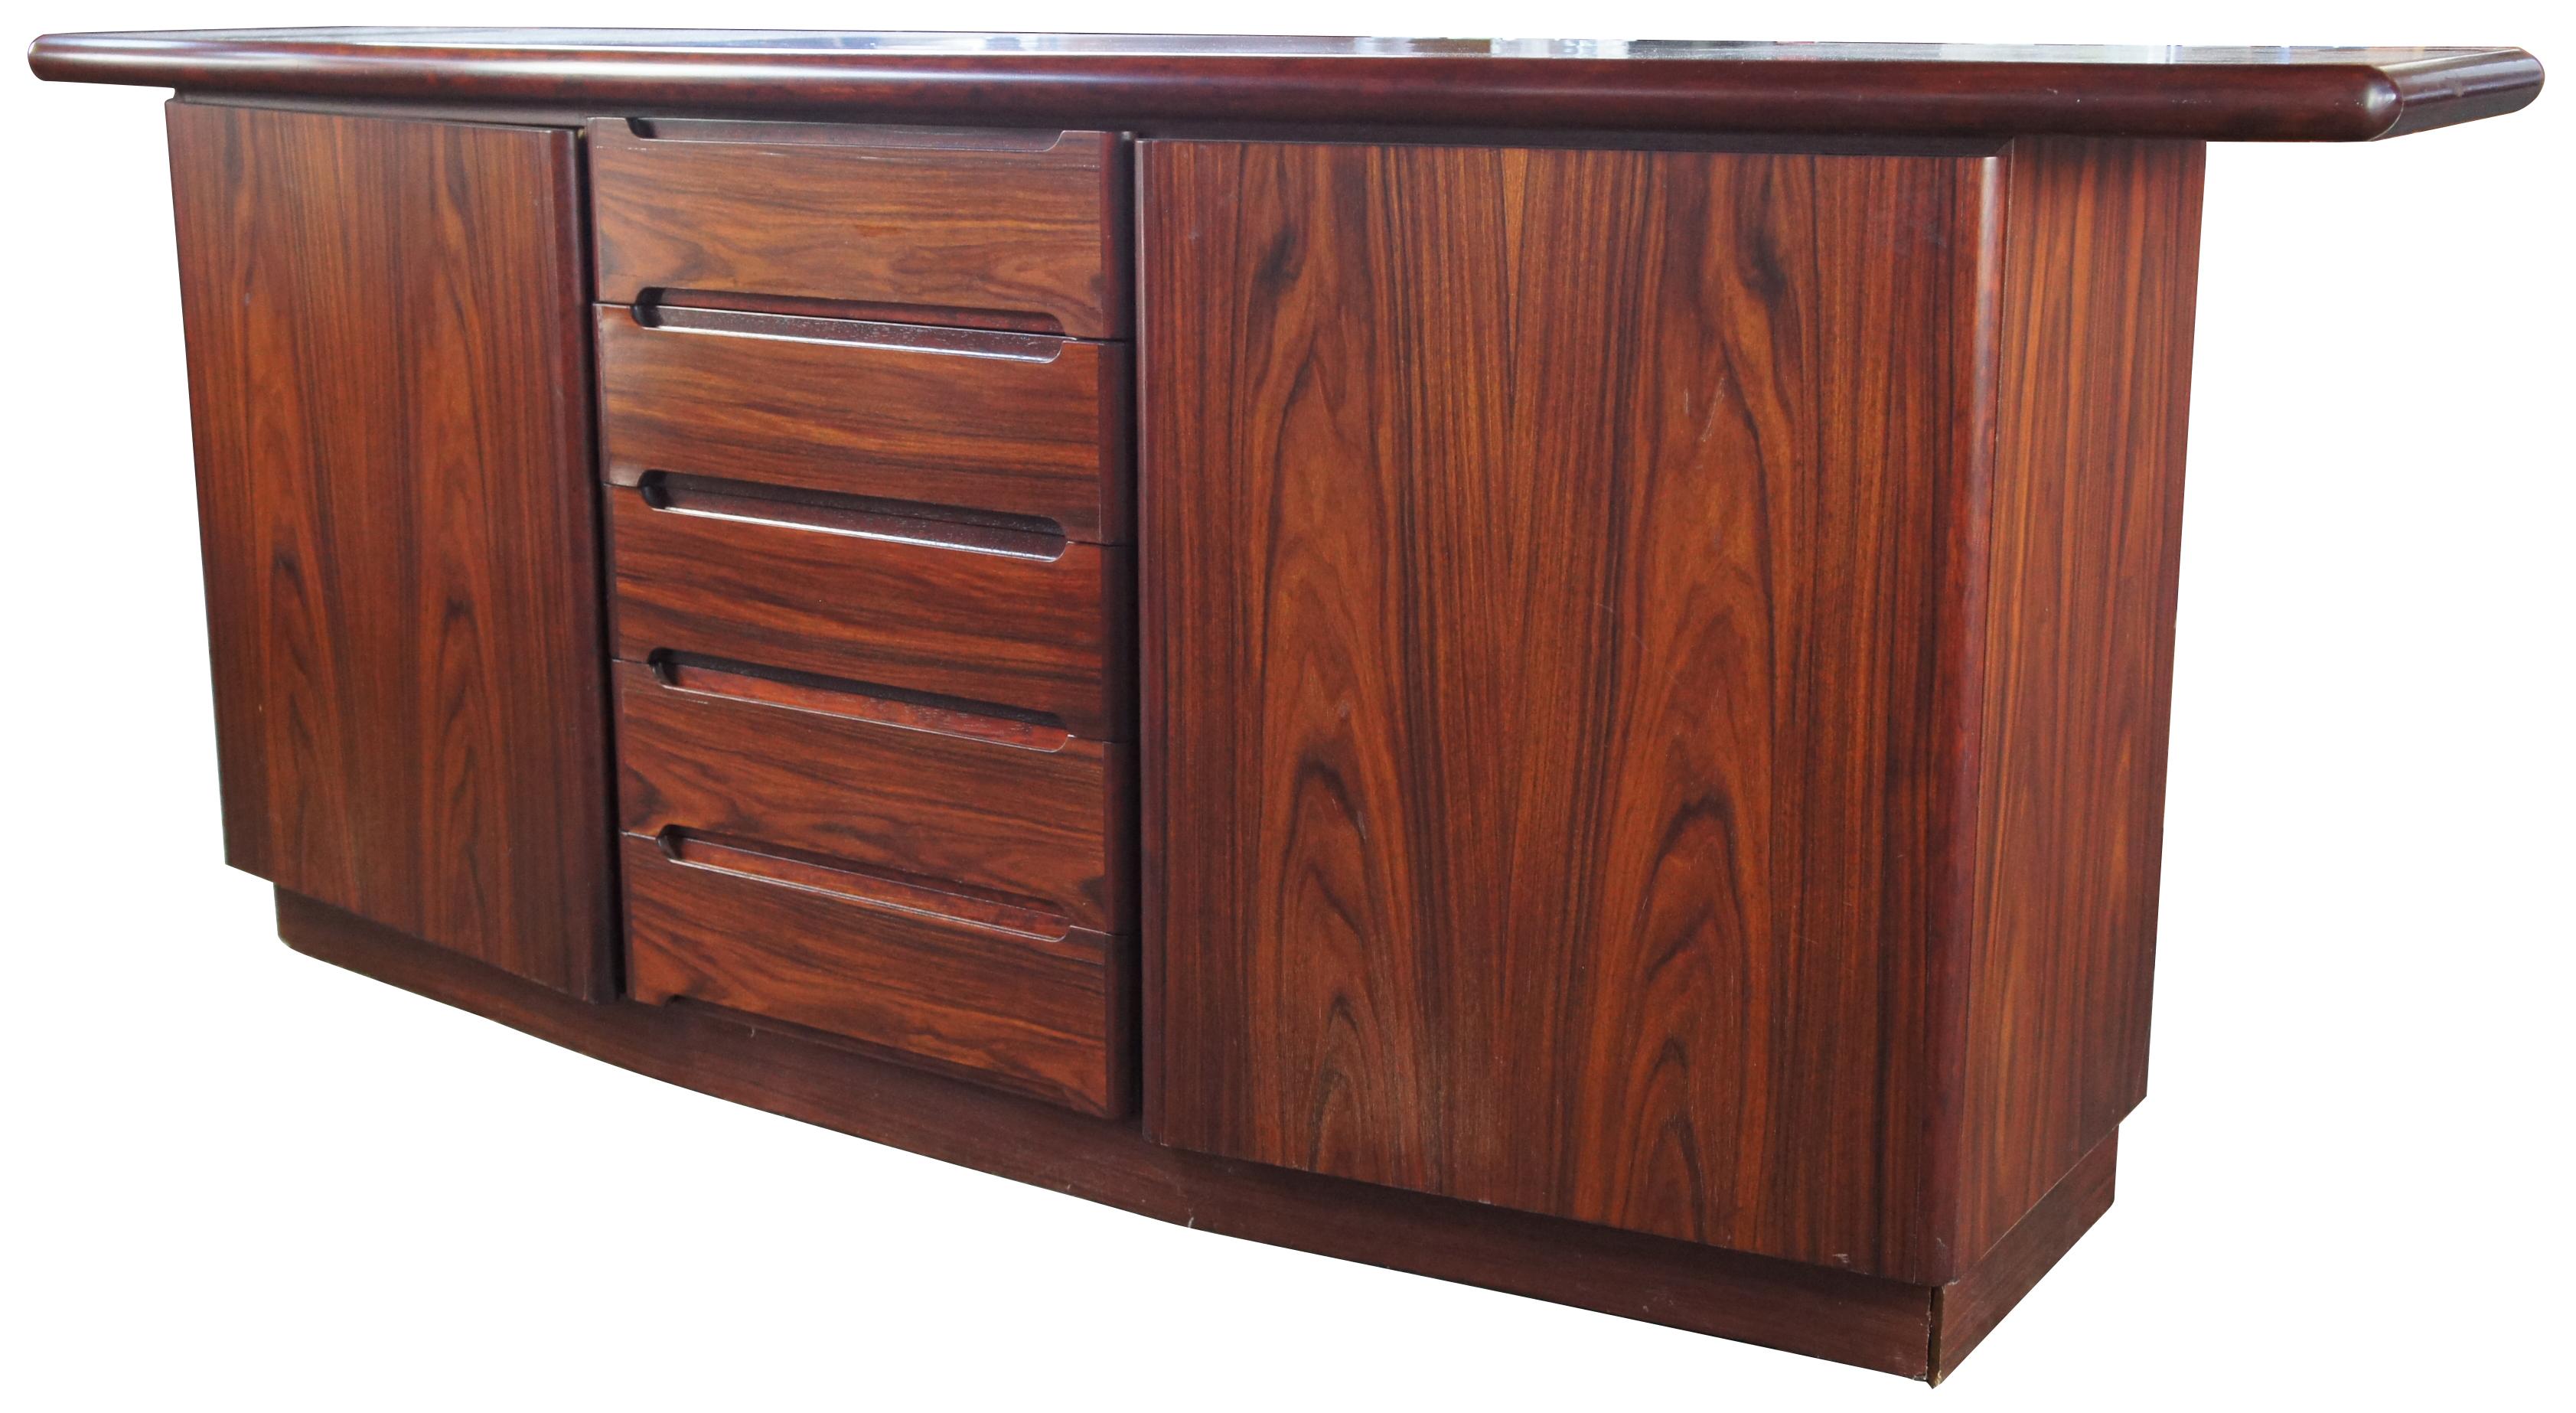 Mid-Century Modern Danish credenza by Skovby rosewood bow front buffet console

Danish modern sideboard by Skovby Møbelfabrik. Features a bow front with a wing shaped top. Made from Rosewood with five drawers flanked by outer cabinets with two